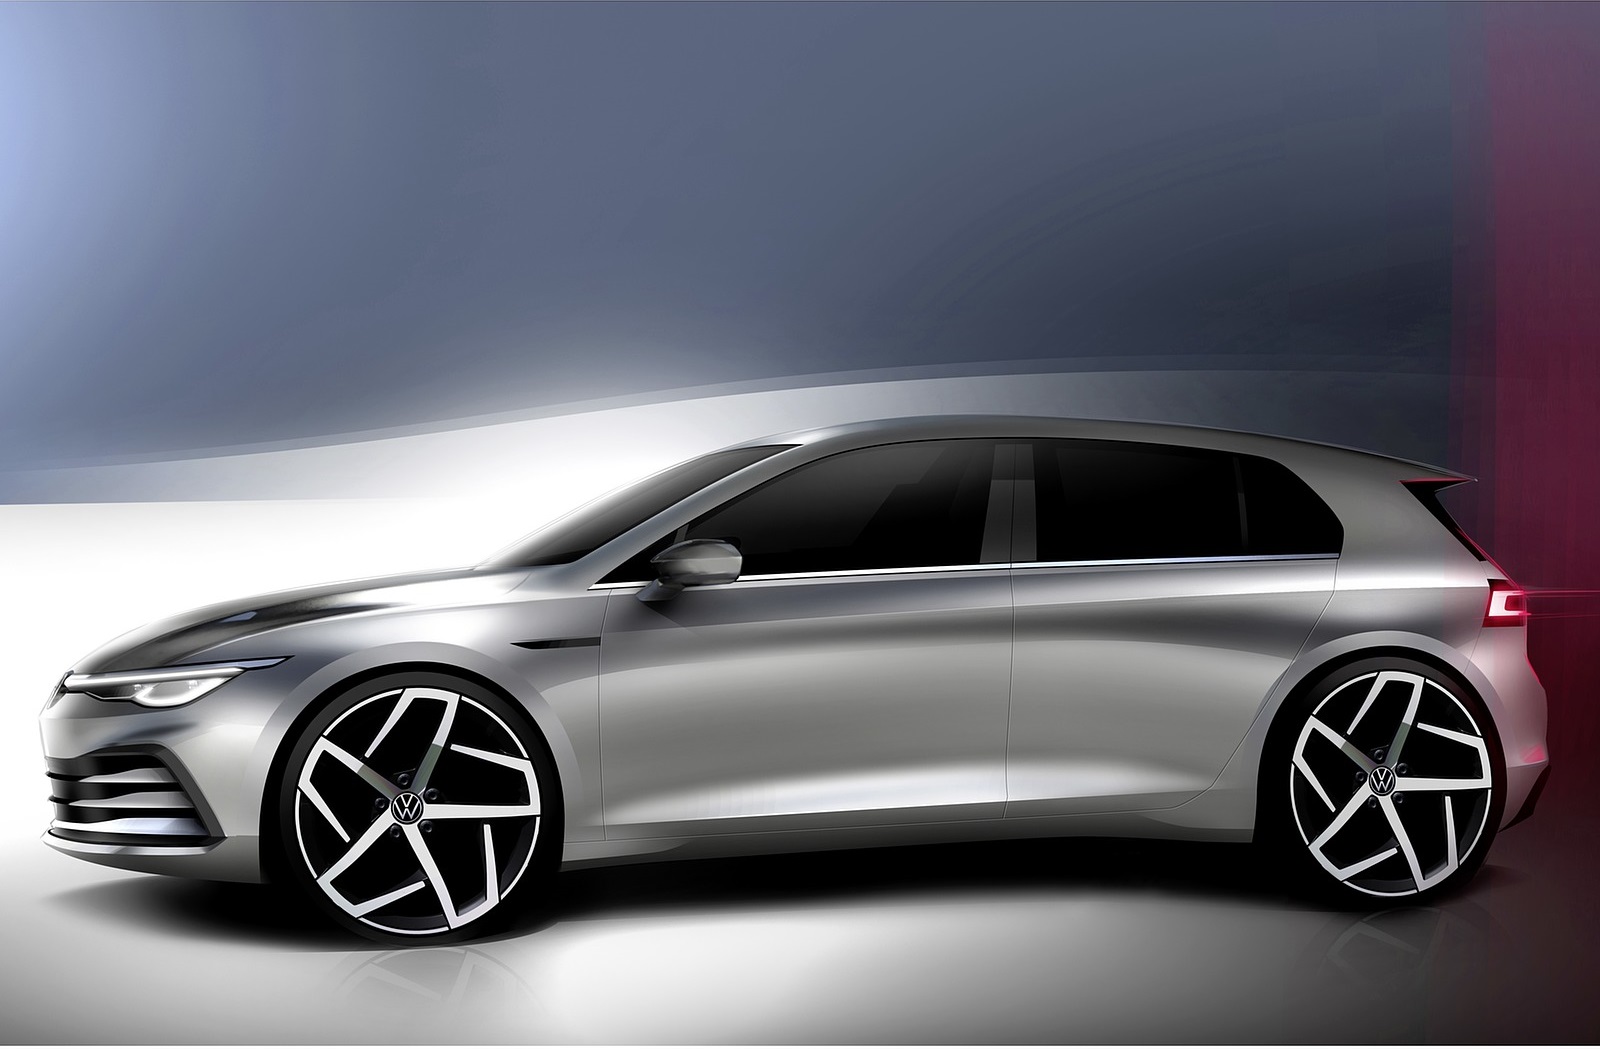 2020 Volkswagen Golf Mk8 and Previous Generations Design Sketch Wallpapers #72 of 81